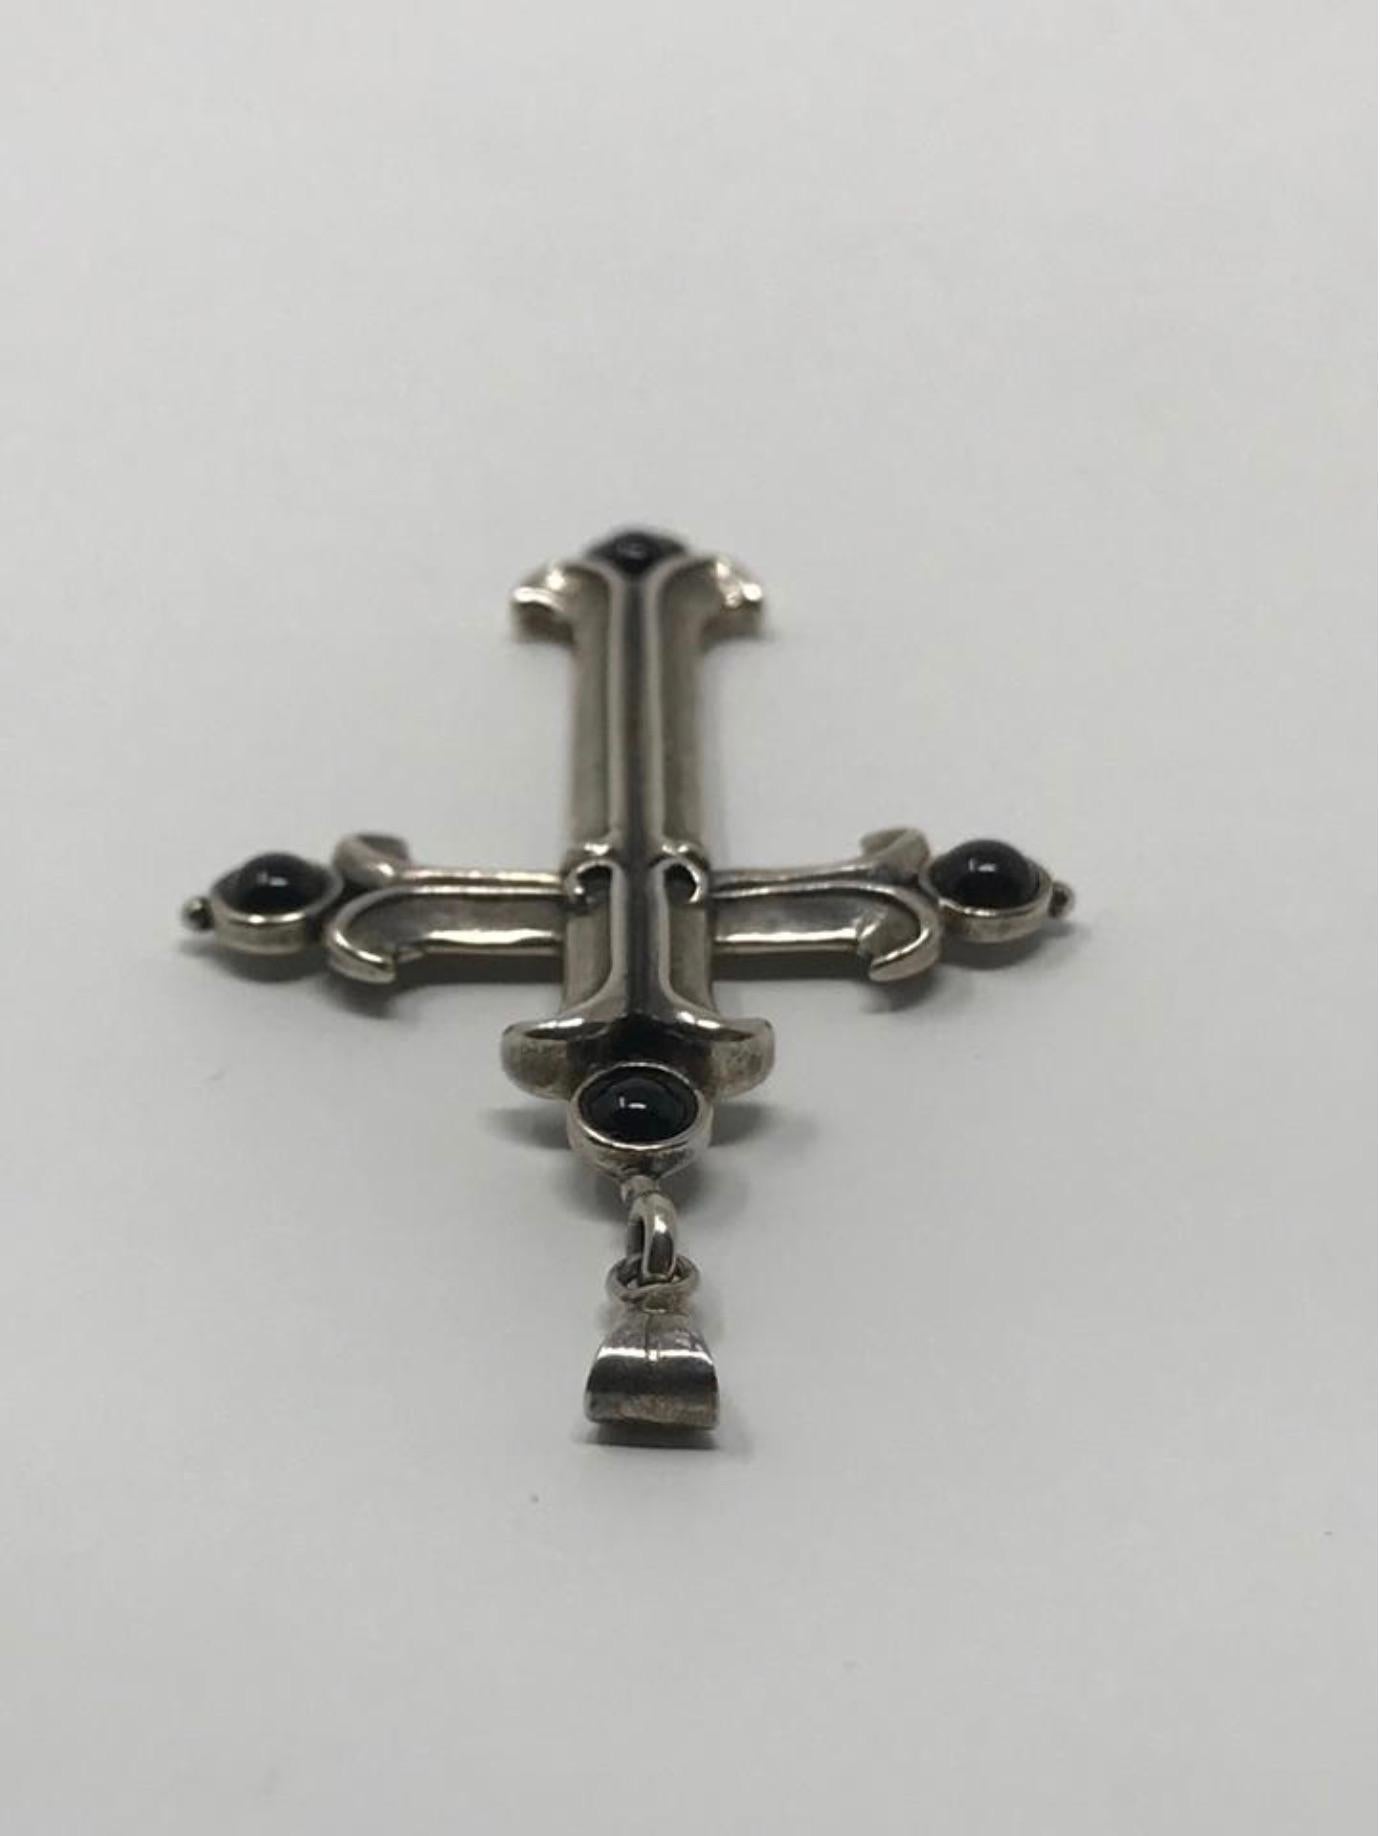 Item - Vintage Sterling Silver Onyx Crucifix Pendent

Condition - Exceptional

SKU - 1558

Original Retail Price - $175 + tax

Dimensions - 37mm x 56mm x 5mm

Material - Silver .925

Weight - 6.75 oz

Comes with - No Additional